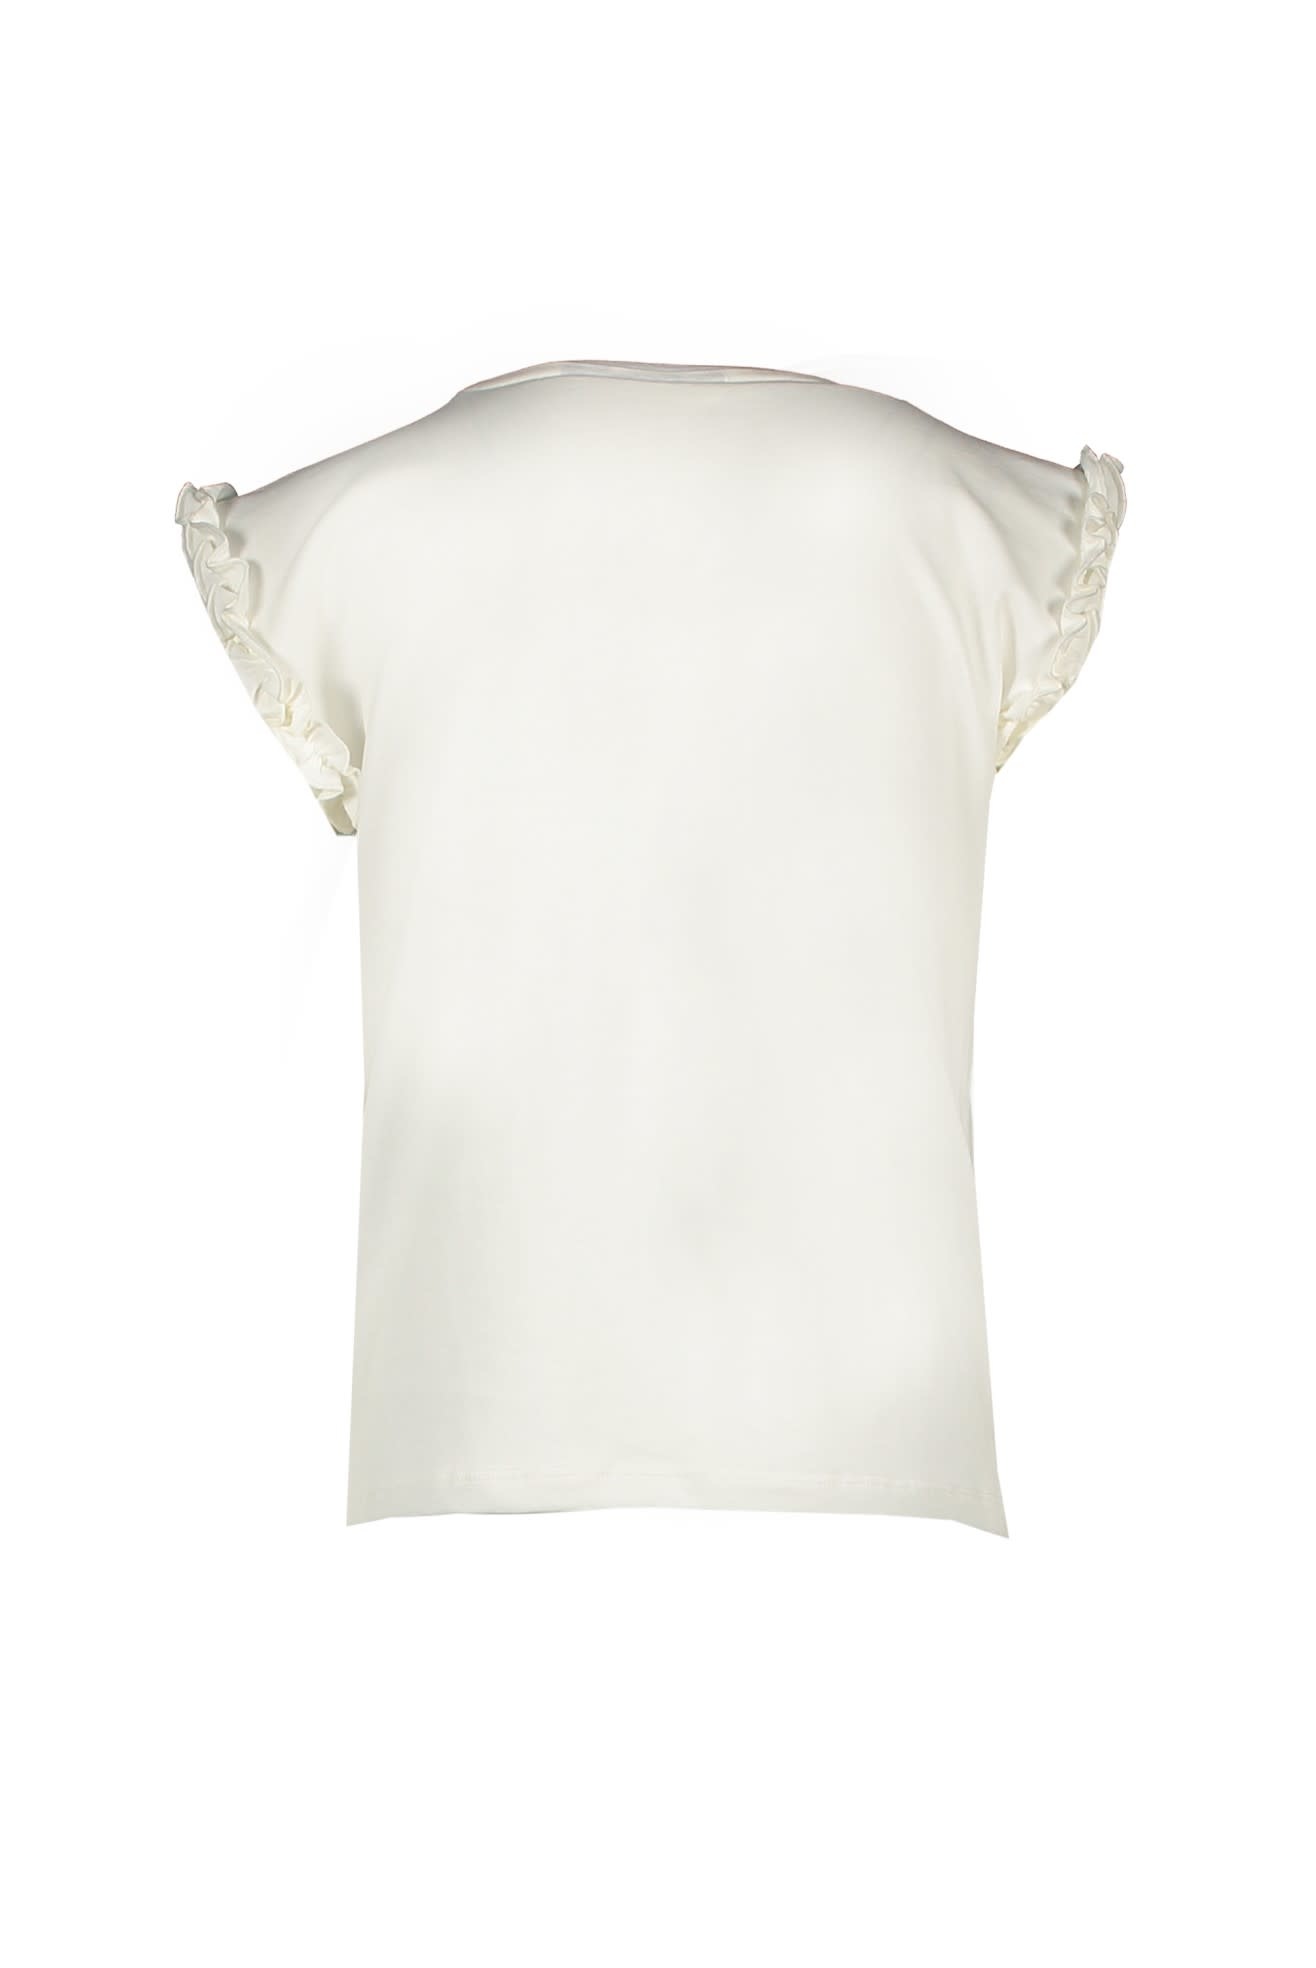 Nopaly Dragonfly Tee - Off White